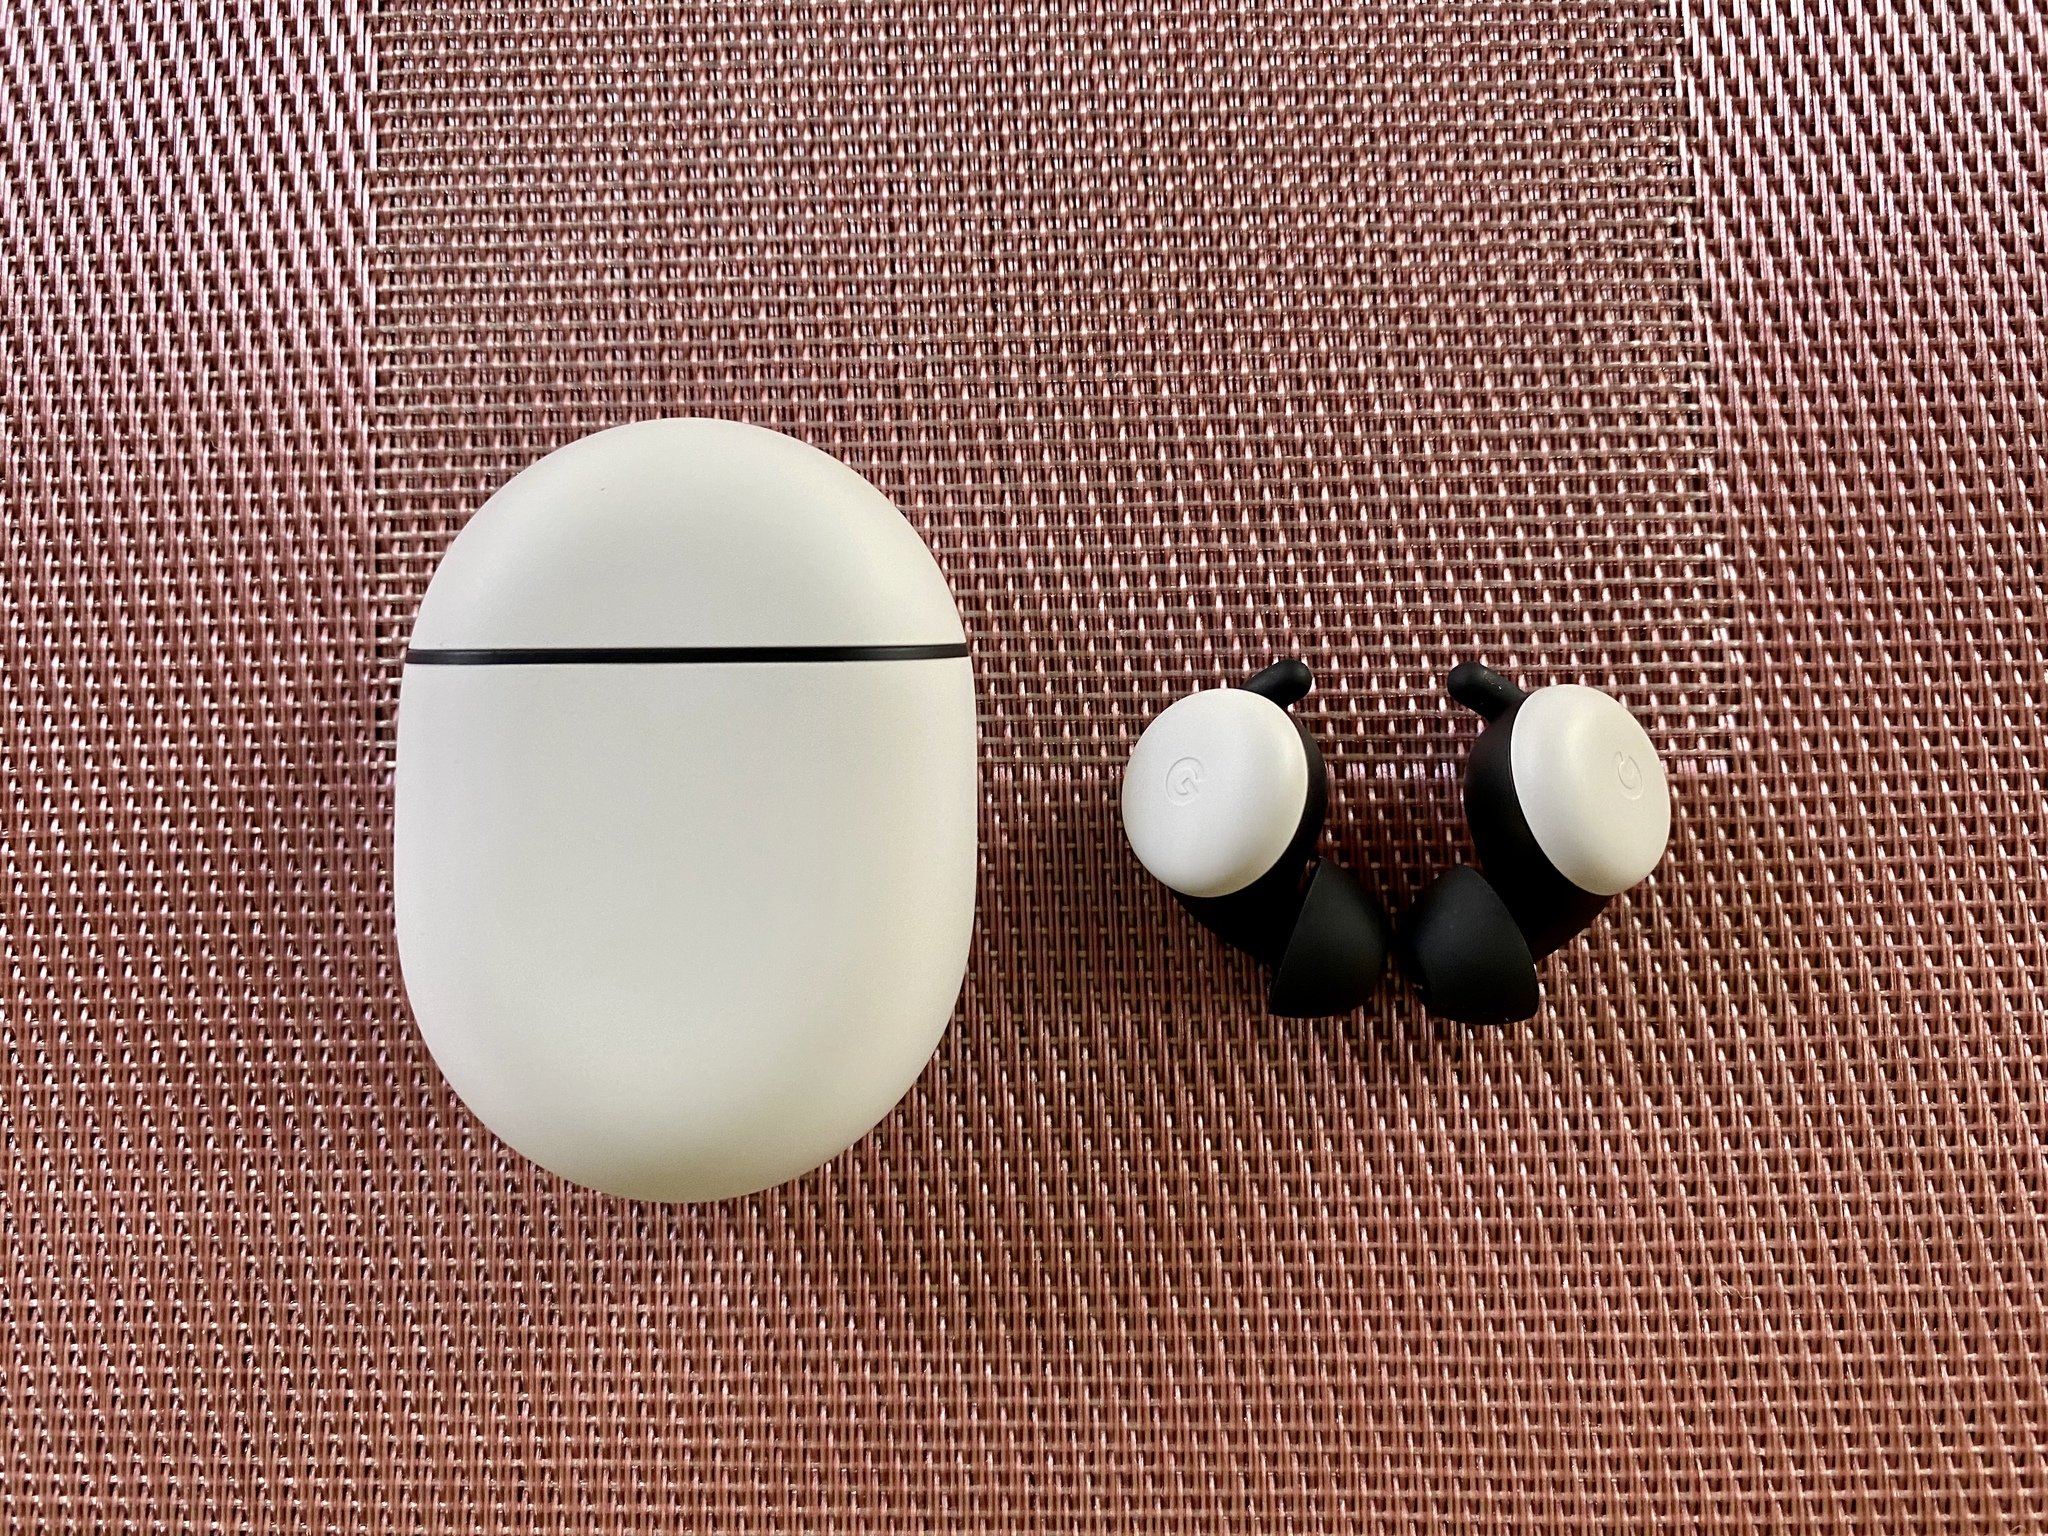 Google Pixel Buds Out